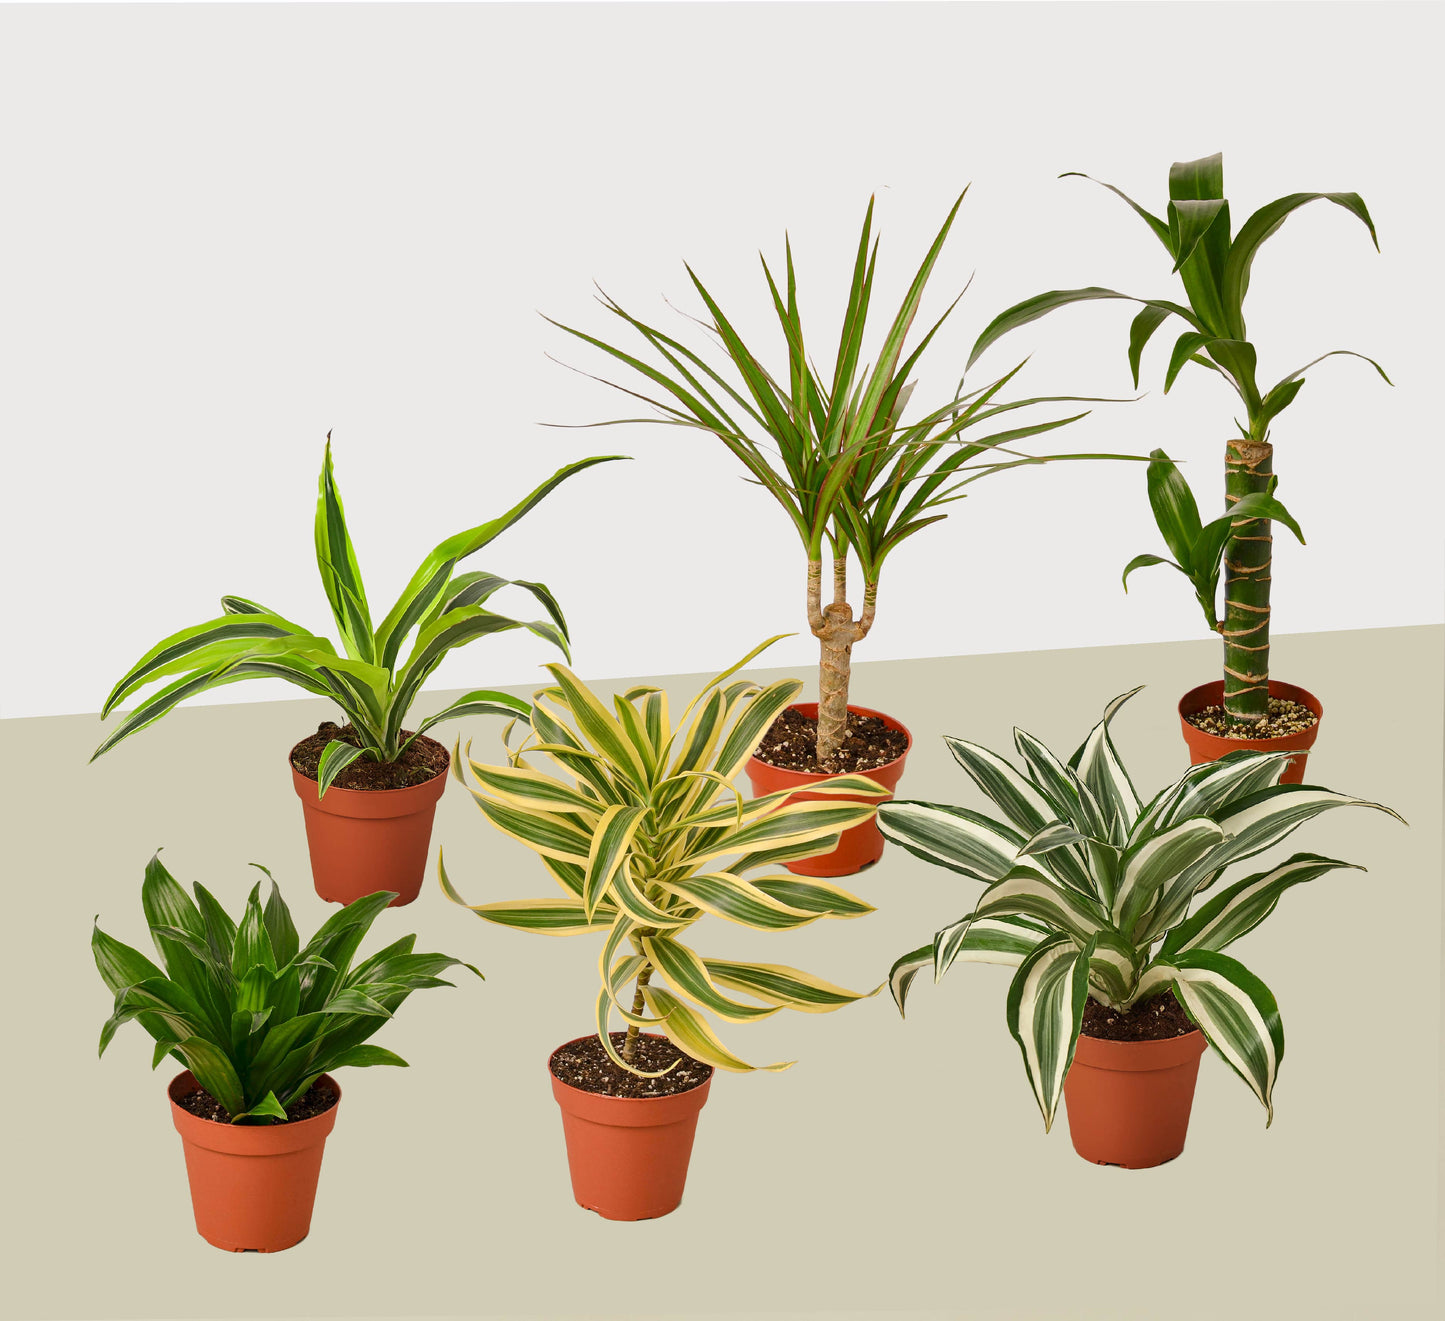 6 Dracaena Variety Pack - 4" Pots - Live House Plant - FREE Care Guide